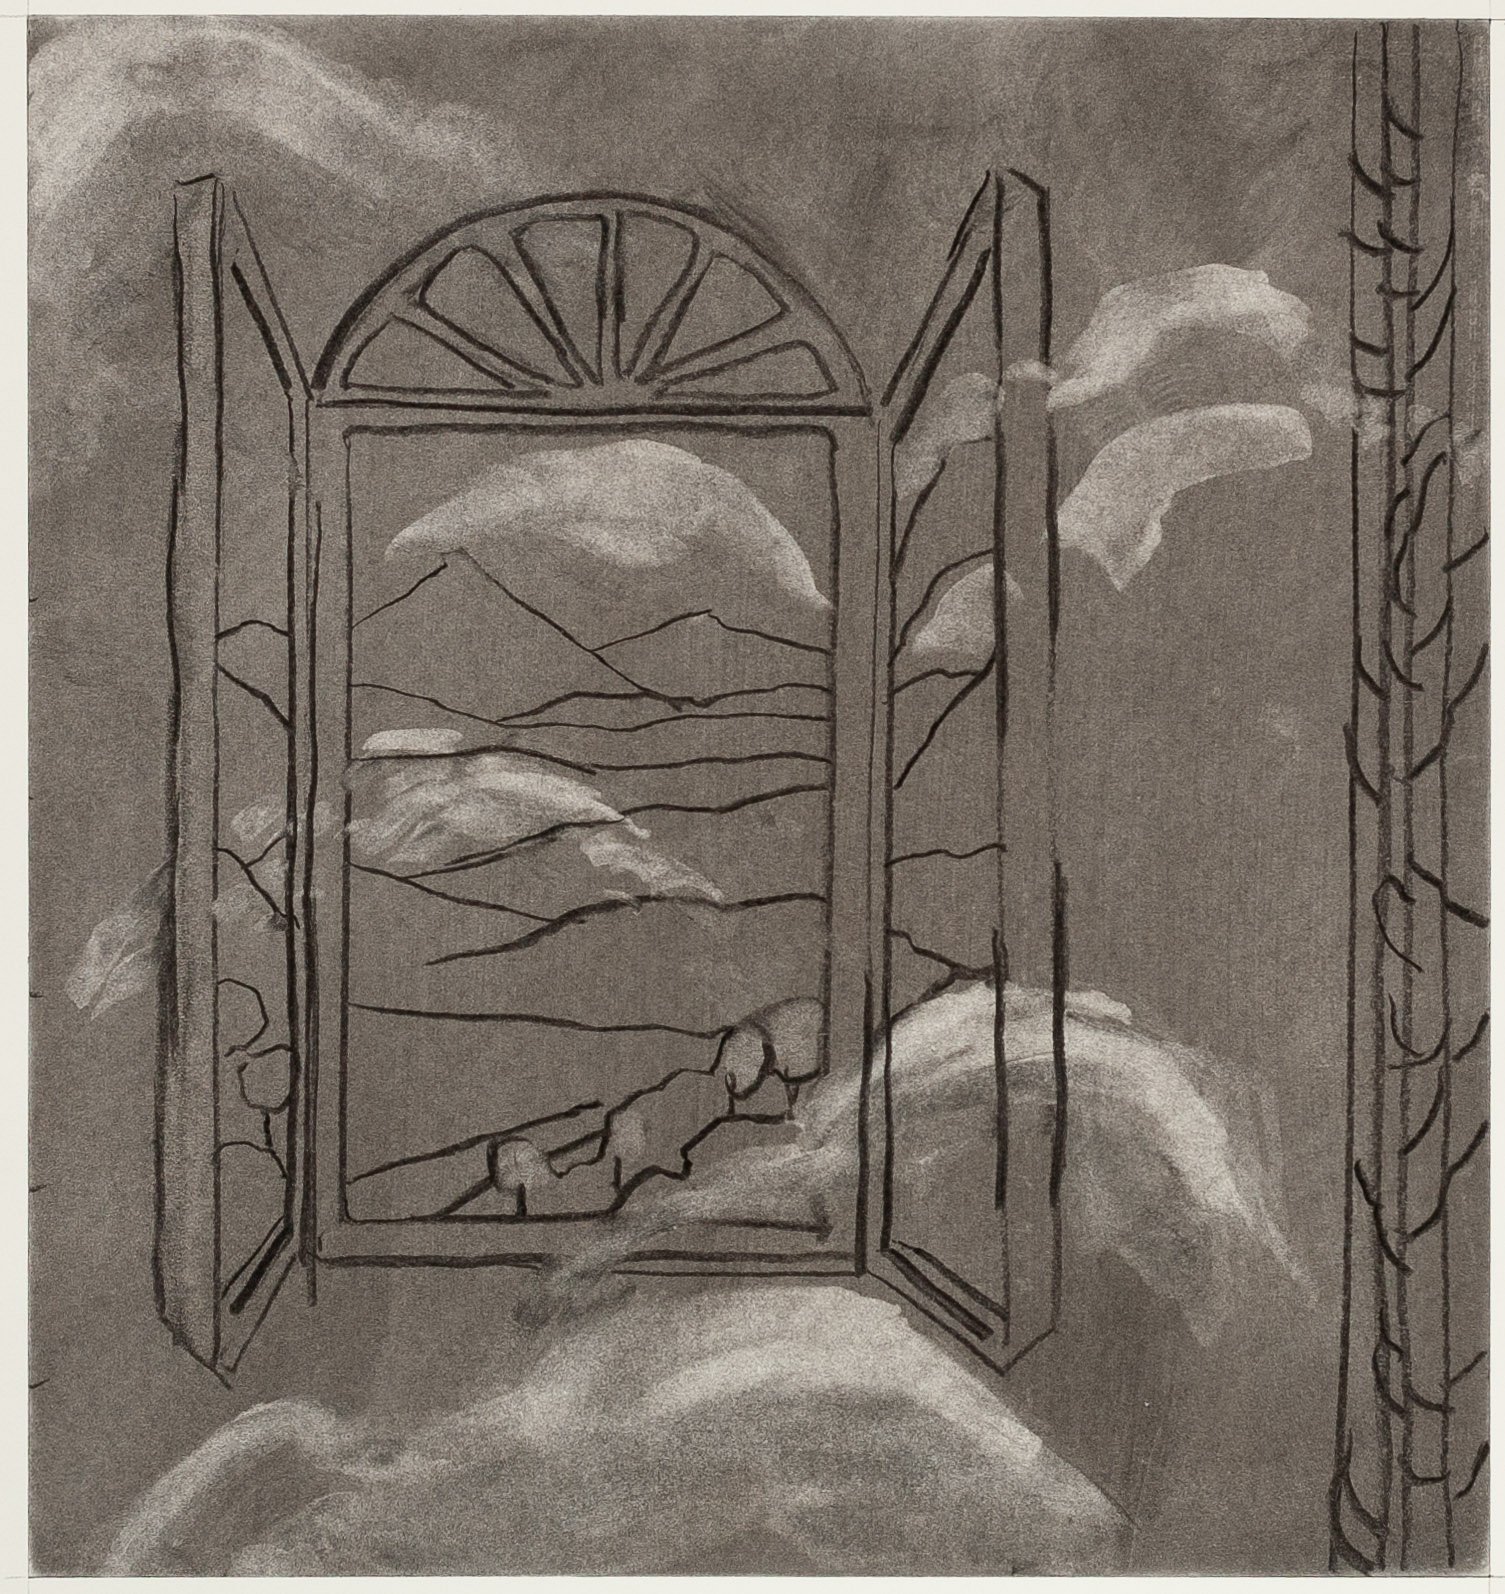   Night Window   Charcoal on paper  16 X 15 inches  2023   